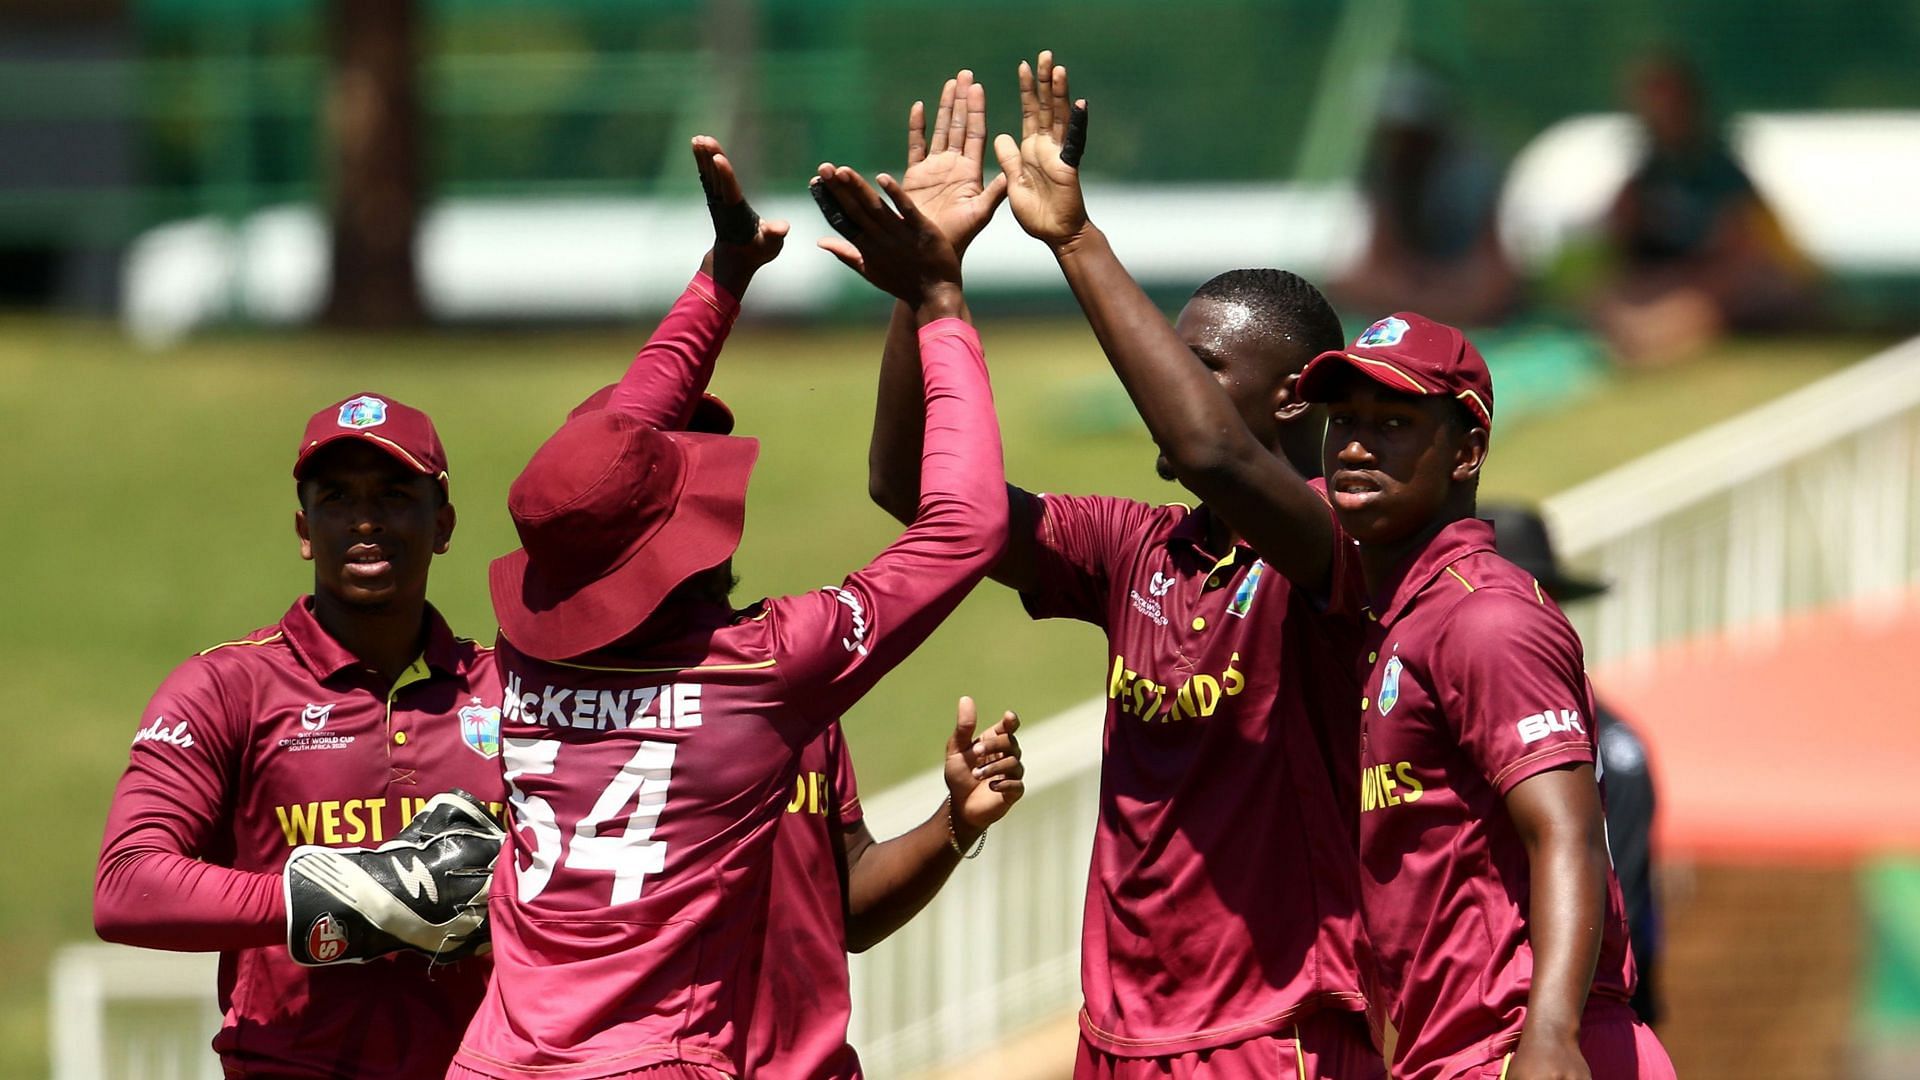 West Indies will take on Scotland in their next game in the Under19 World Cup.